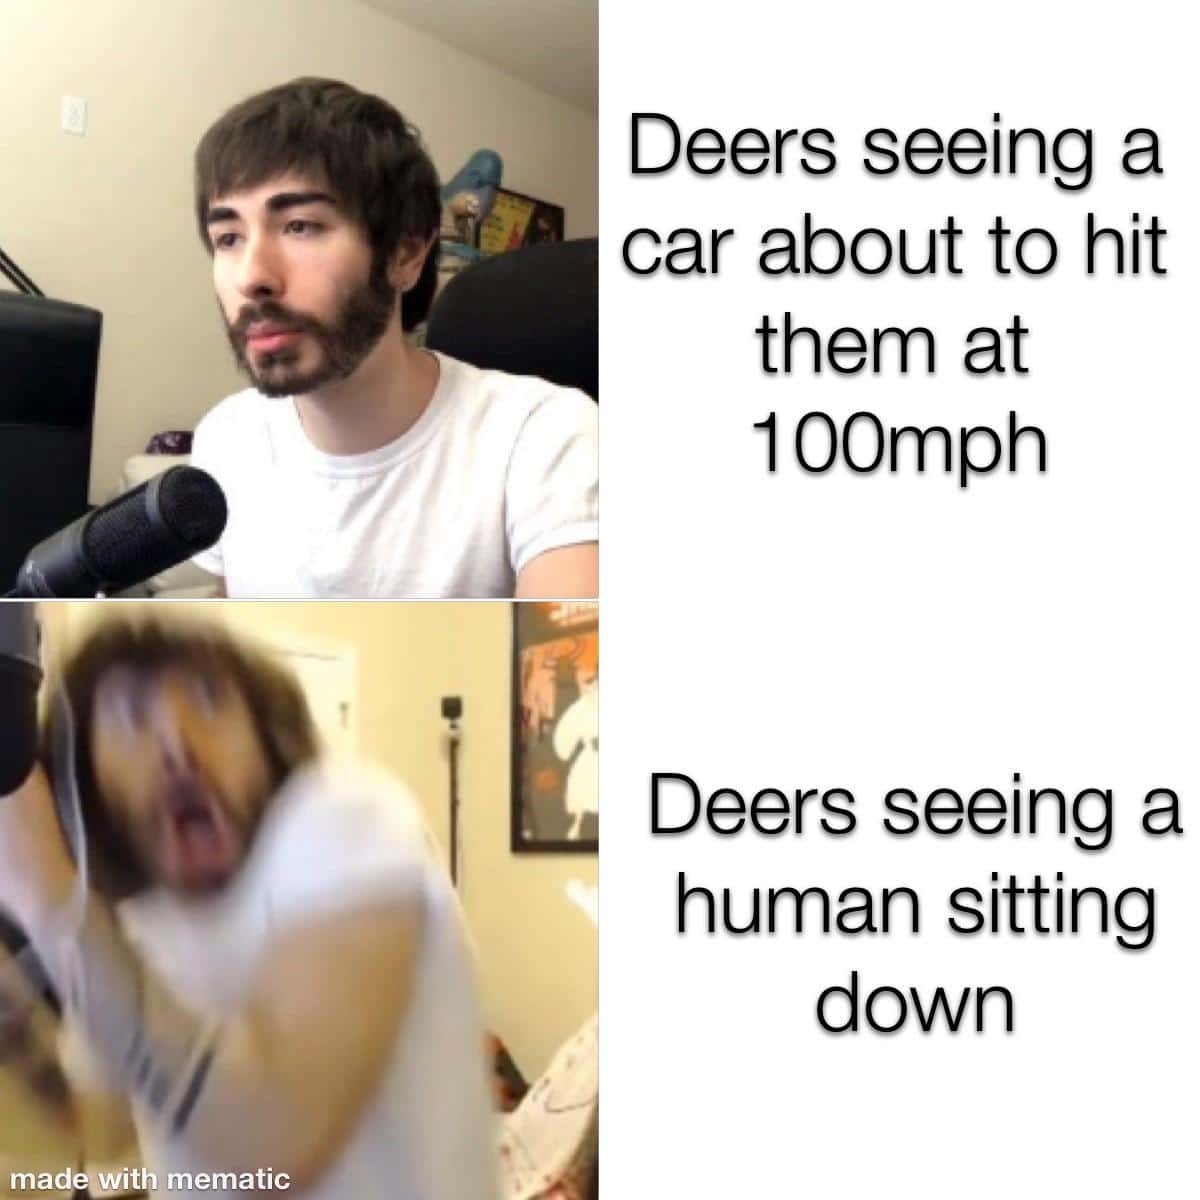 Dank, Charlie, Visit, OC, Negative, JPEG Dank Memes Dank, Charlie, Visit, OC, Negative, JPEG text: Deers seeing a car about to hit them at 100mph Deers seeing a human sitting down made